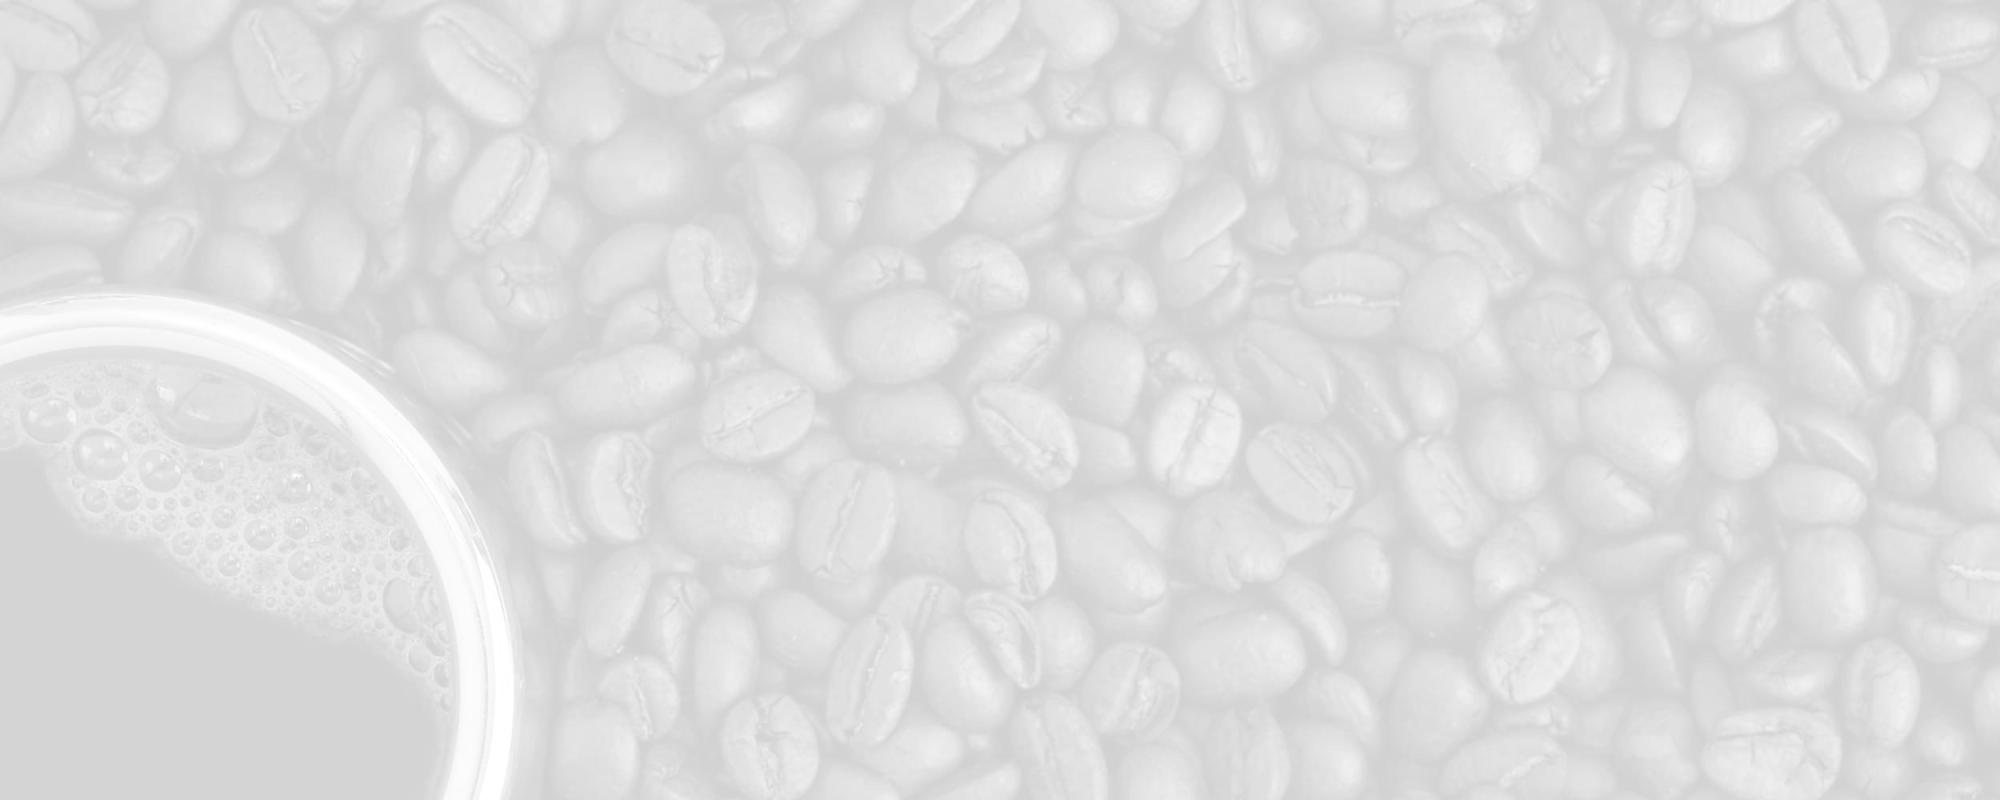 Coffee beans grayscale background